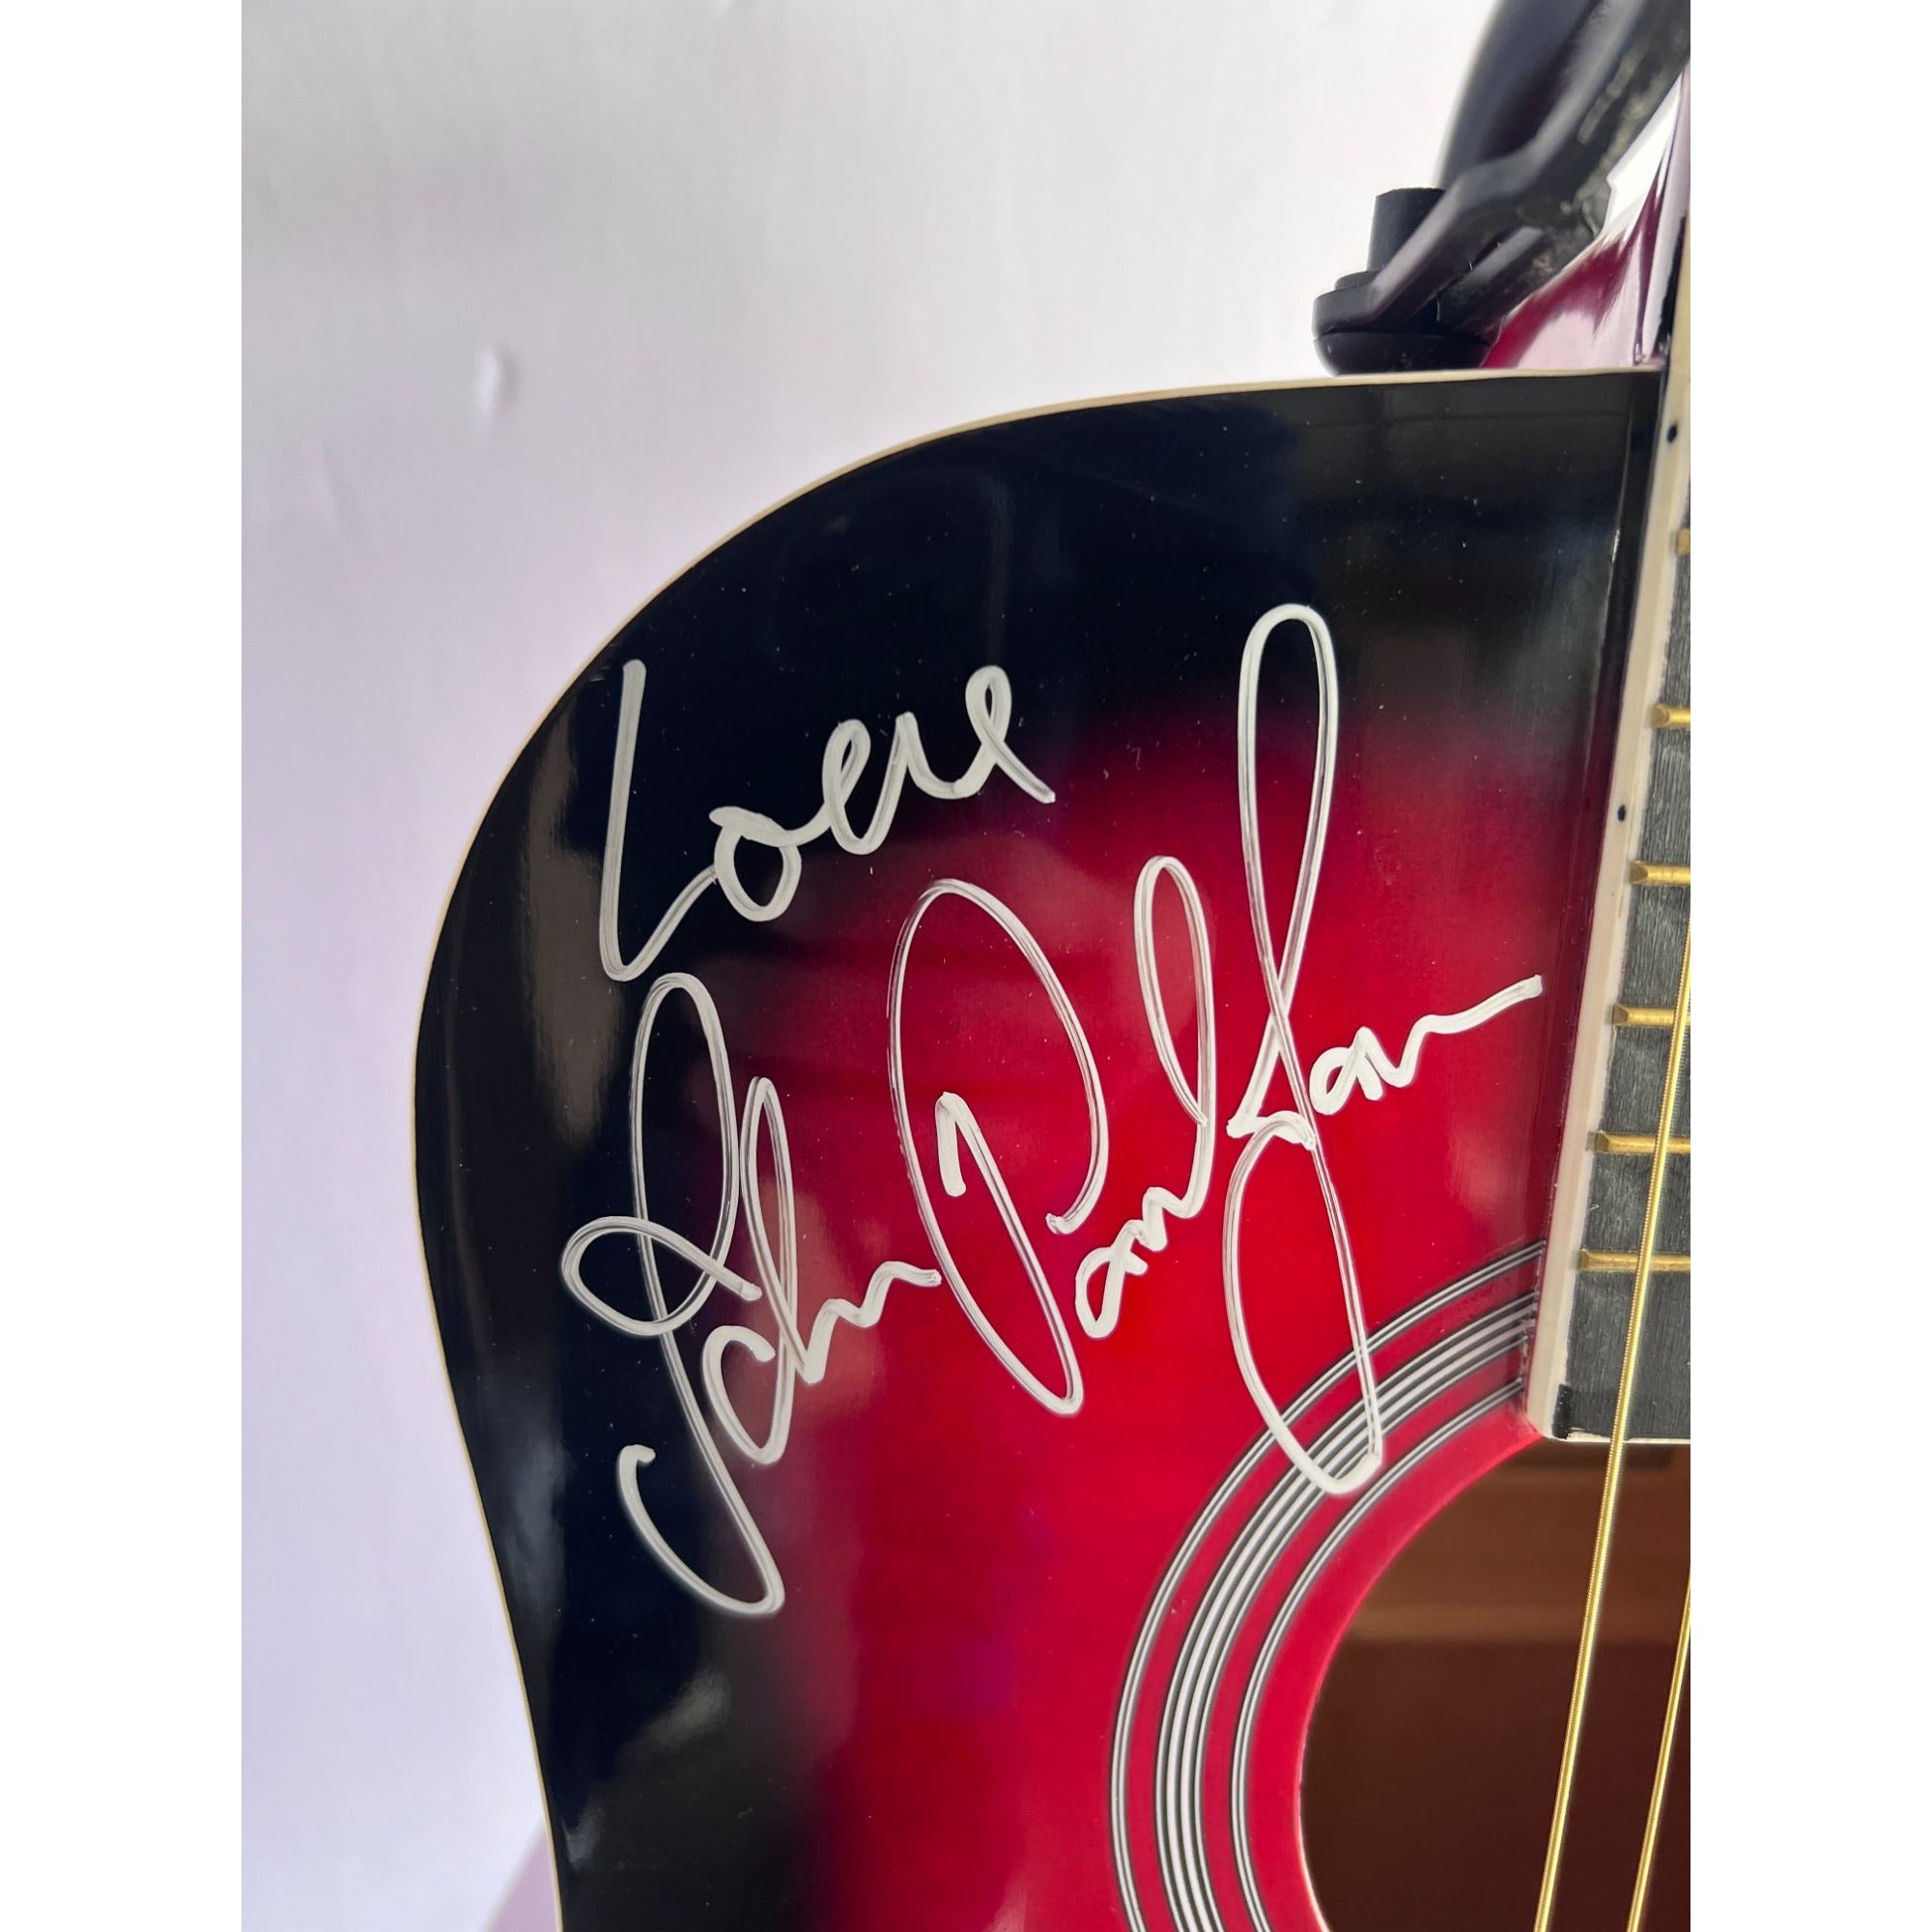 Led Zeppelin Robert Plant Jimmy Page John Paul Jones One of a Kind full size acoustic guitar signed with proof